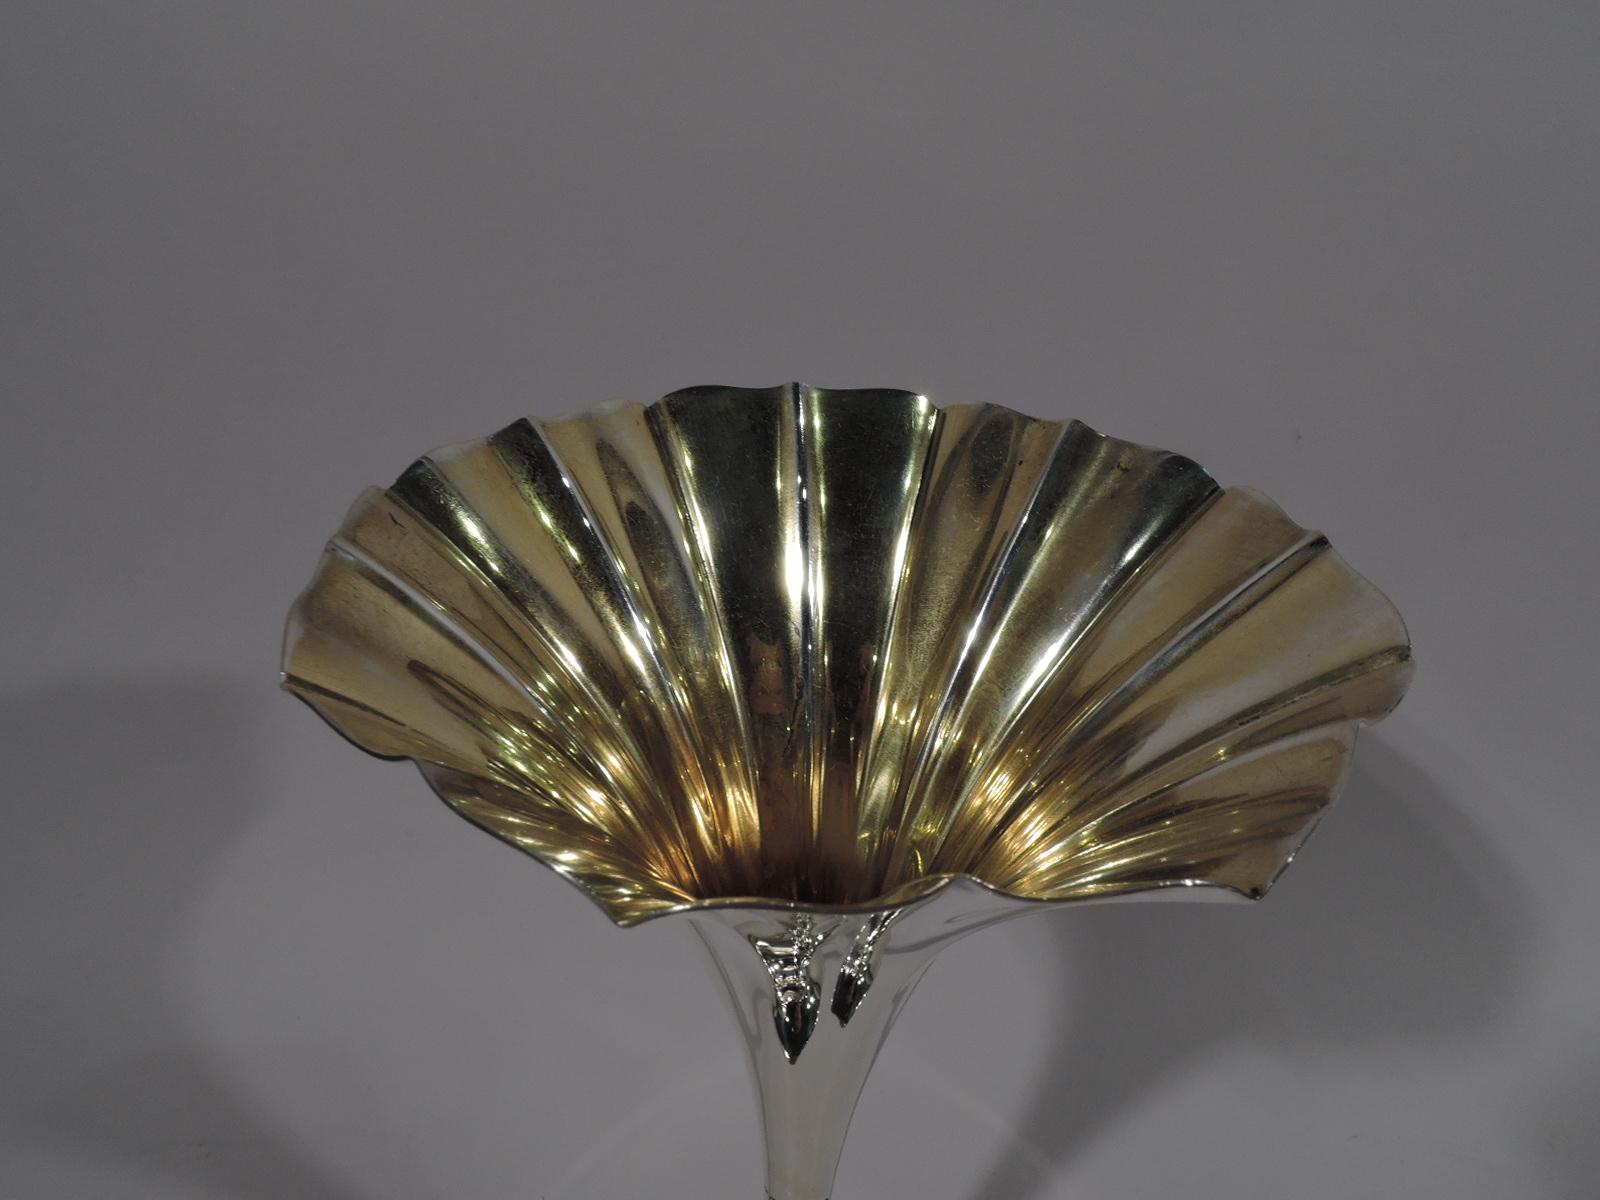 Edwardian sterling silver vase. Made by Tiffany & Co. in New York, ca 1910. Elongated cone on small dome set in flat circular foot. Flutes and applied beads. Gilt interior. Fully marked including pattern no. 11908F and director’s letter m. Weight: 8